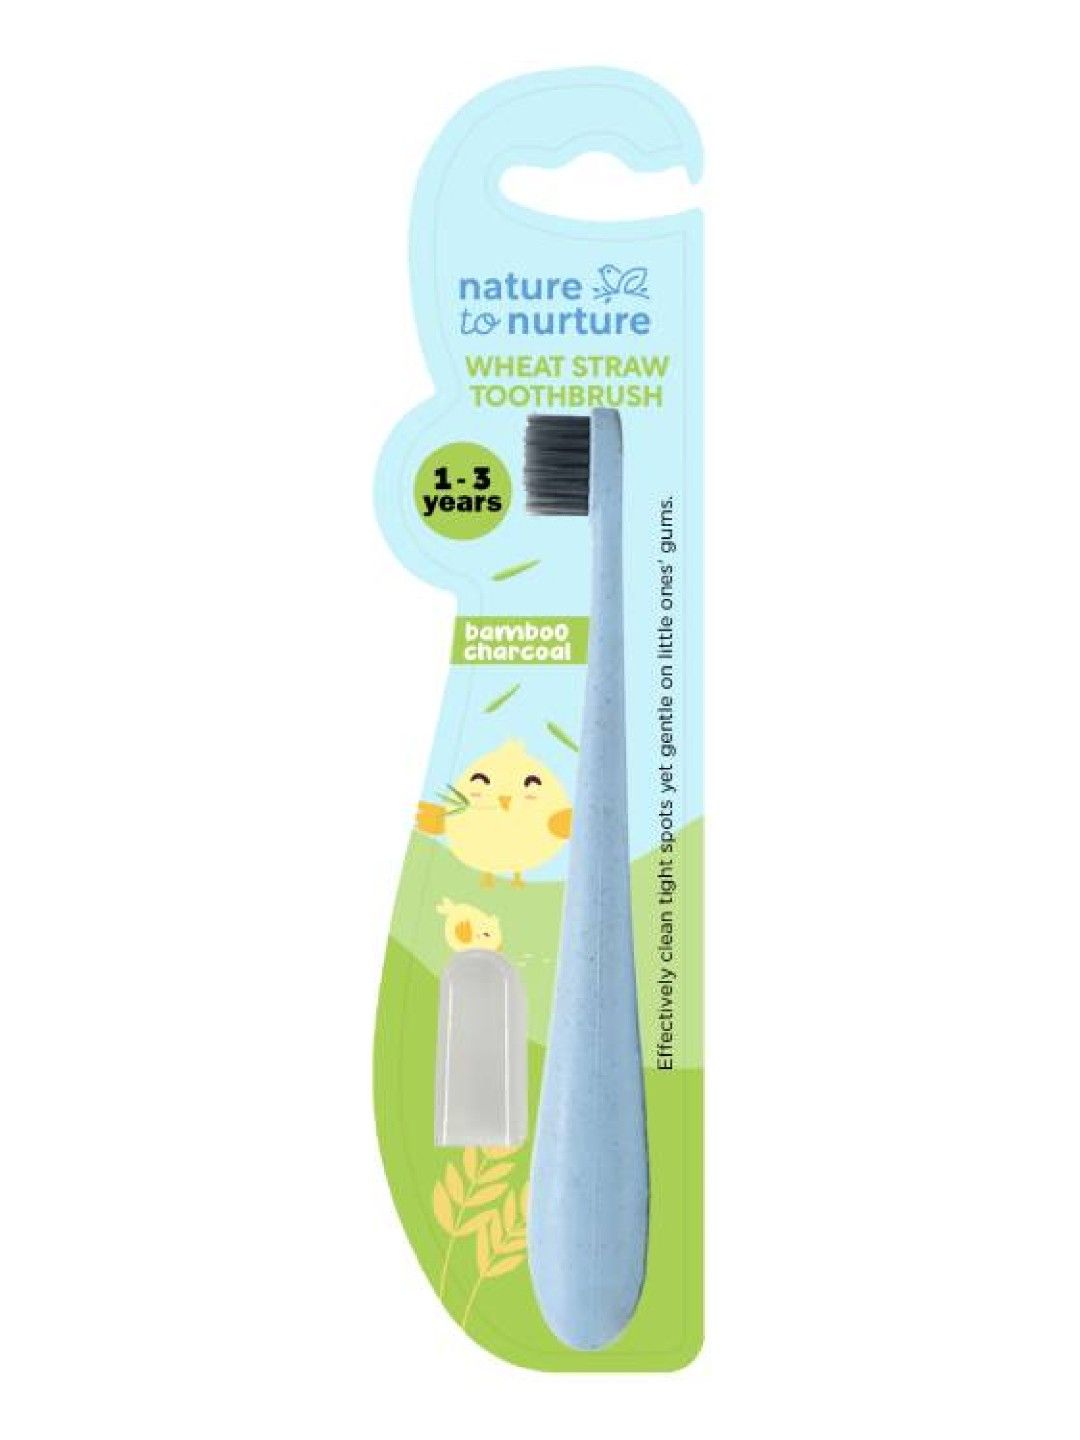 Nature to Nurture Wheat Straw Bamboo Charcoal Toothbrushes (1-3yrs old)